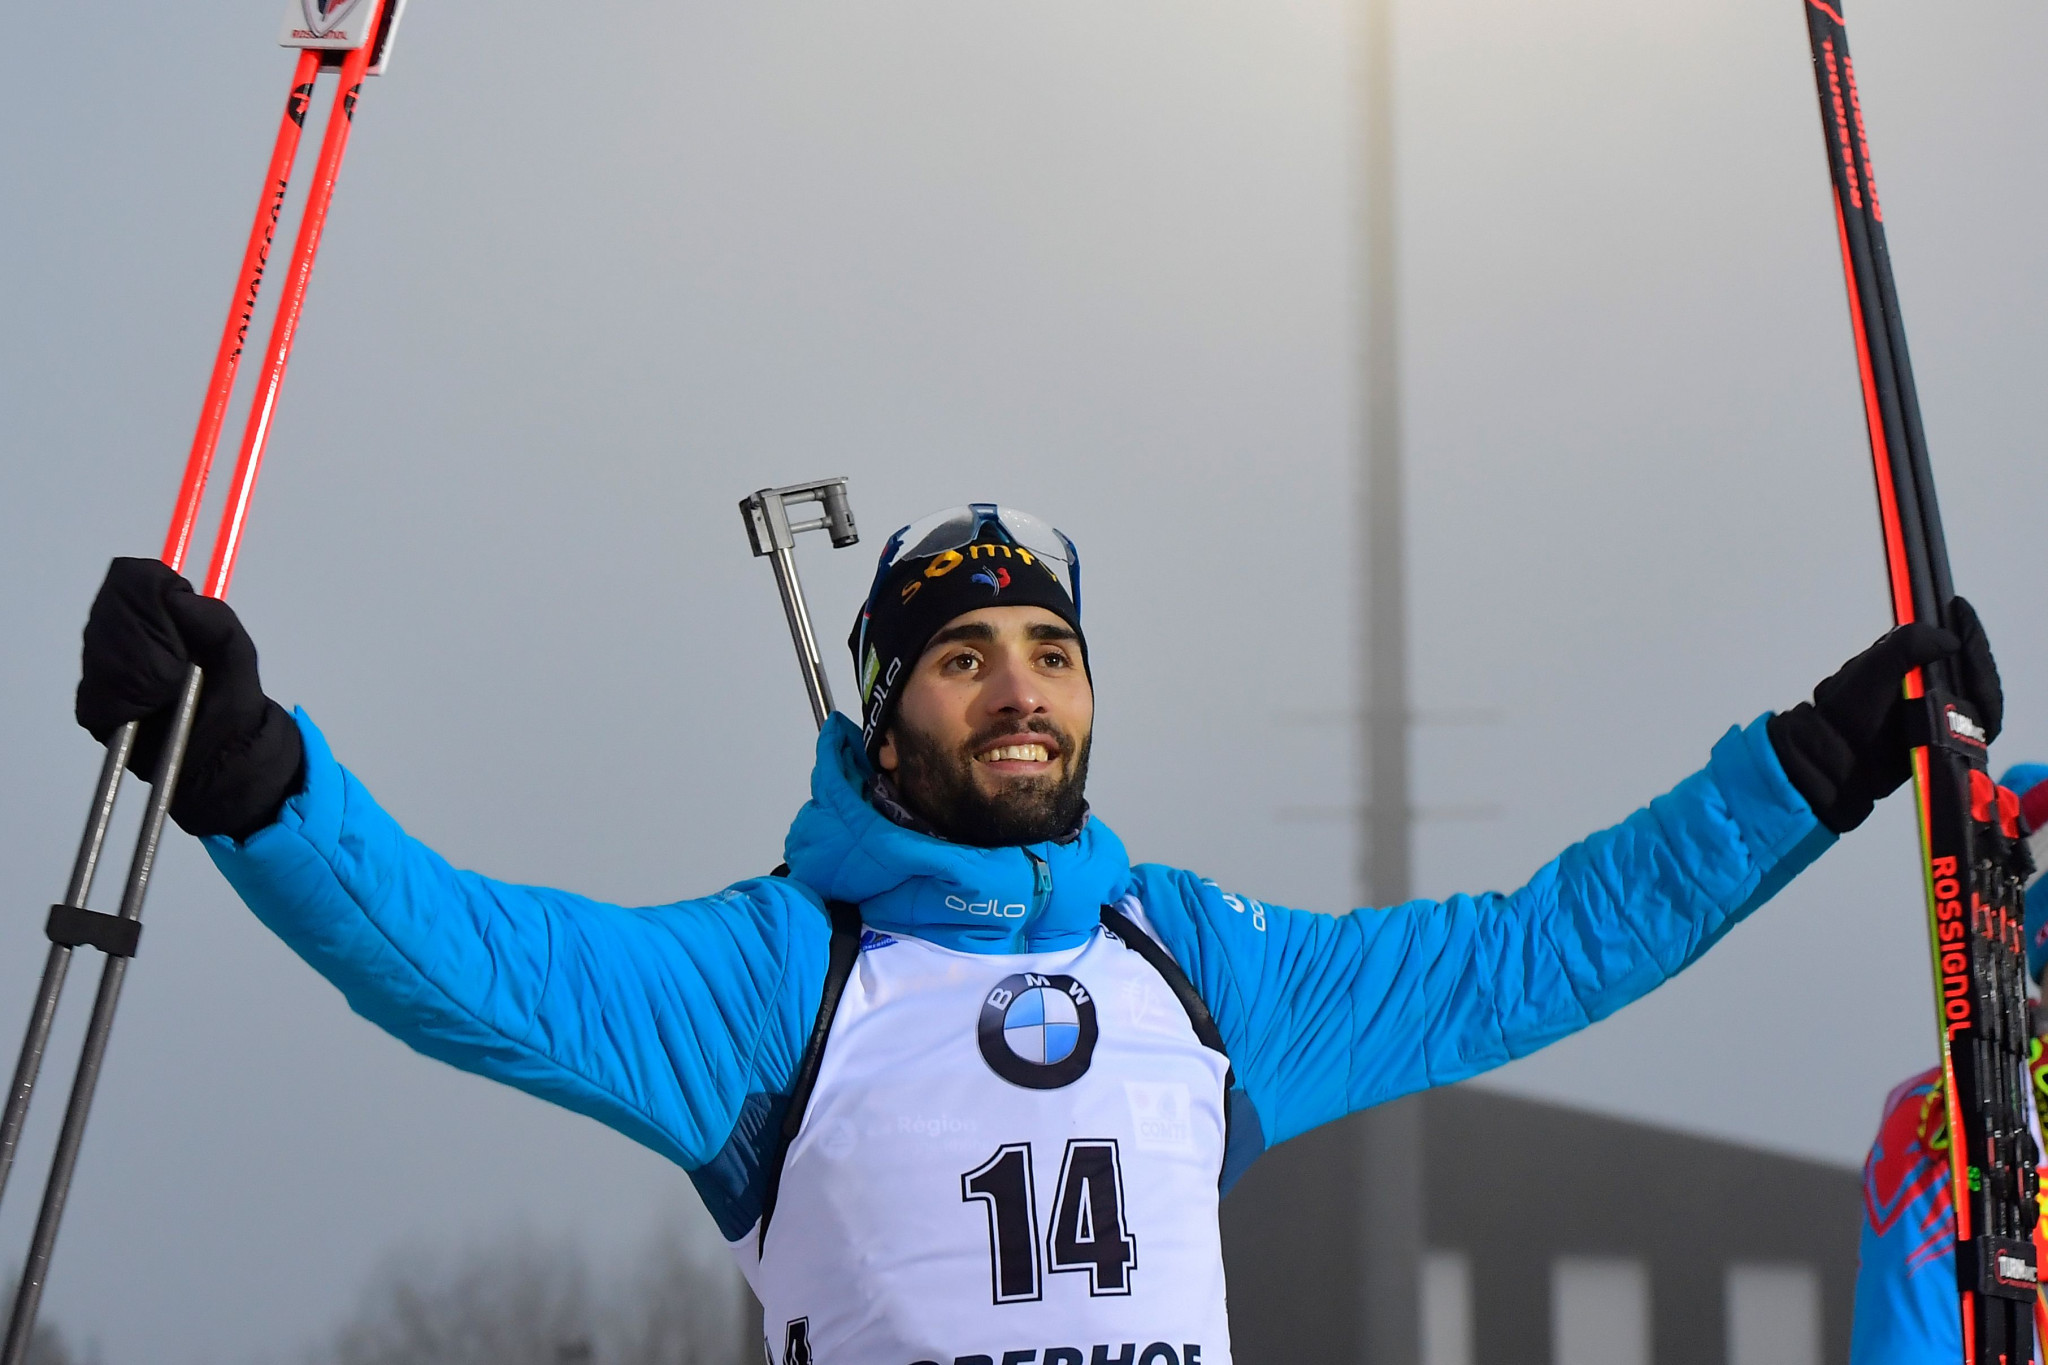 France's Martin Fourcade was back on top of a podium at the IBU World Cup in Oberhof ©Getty Images